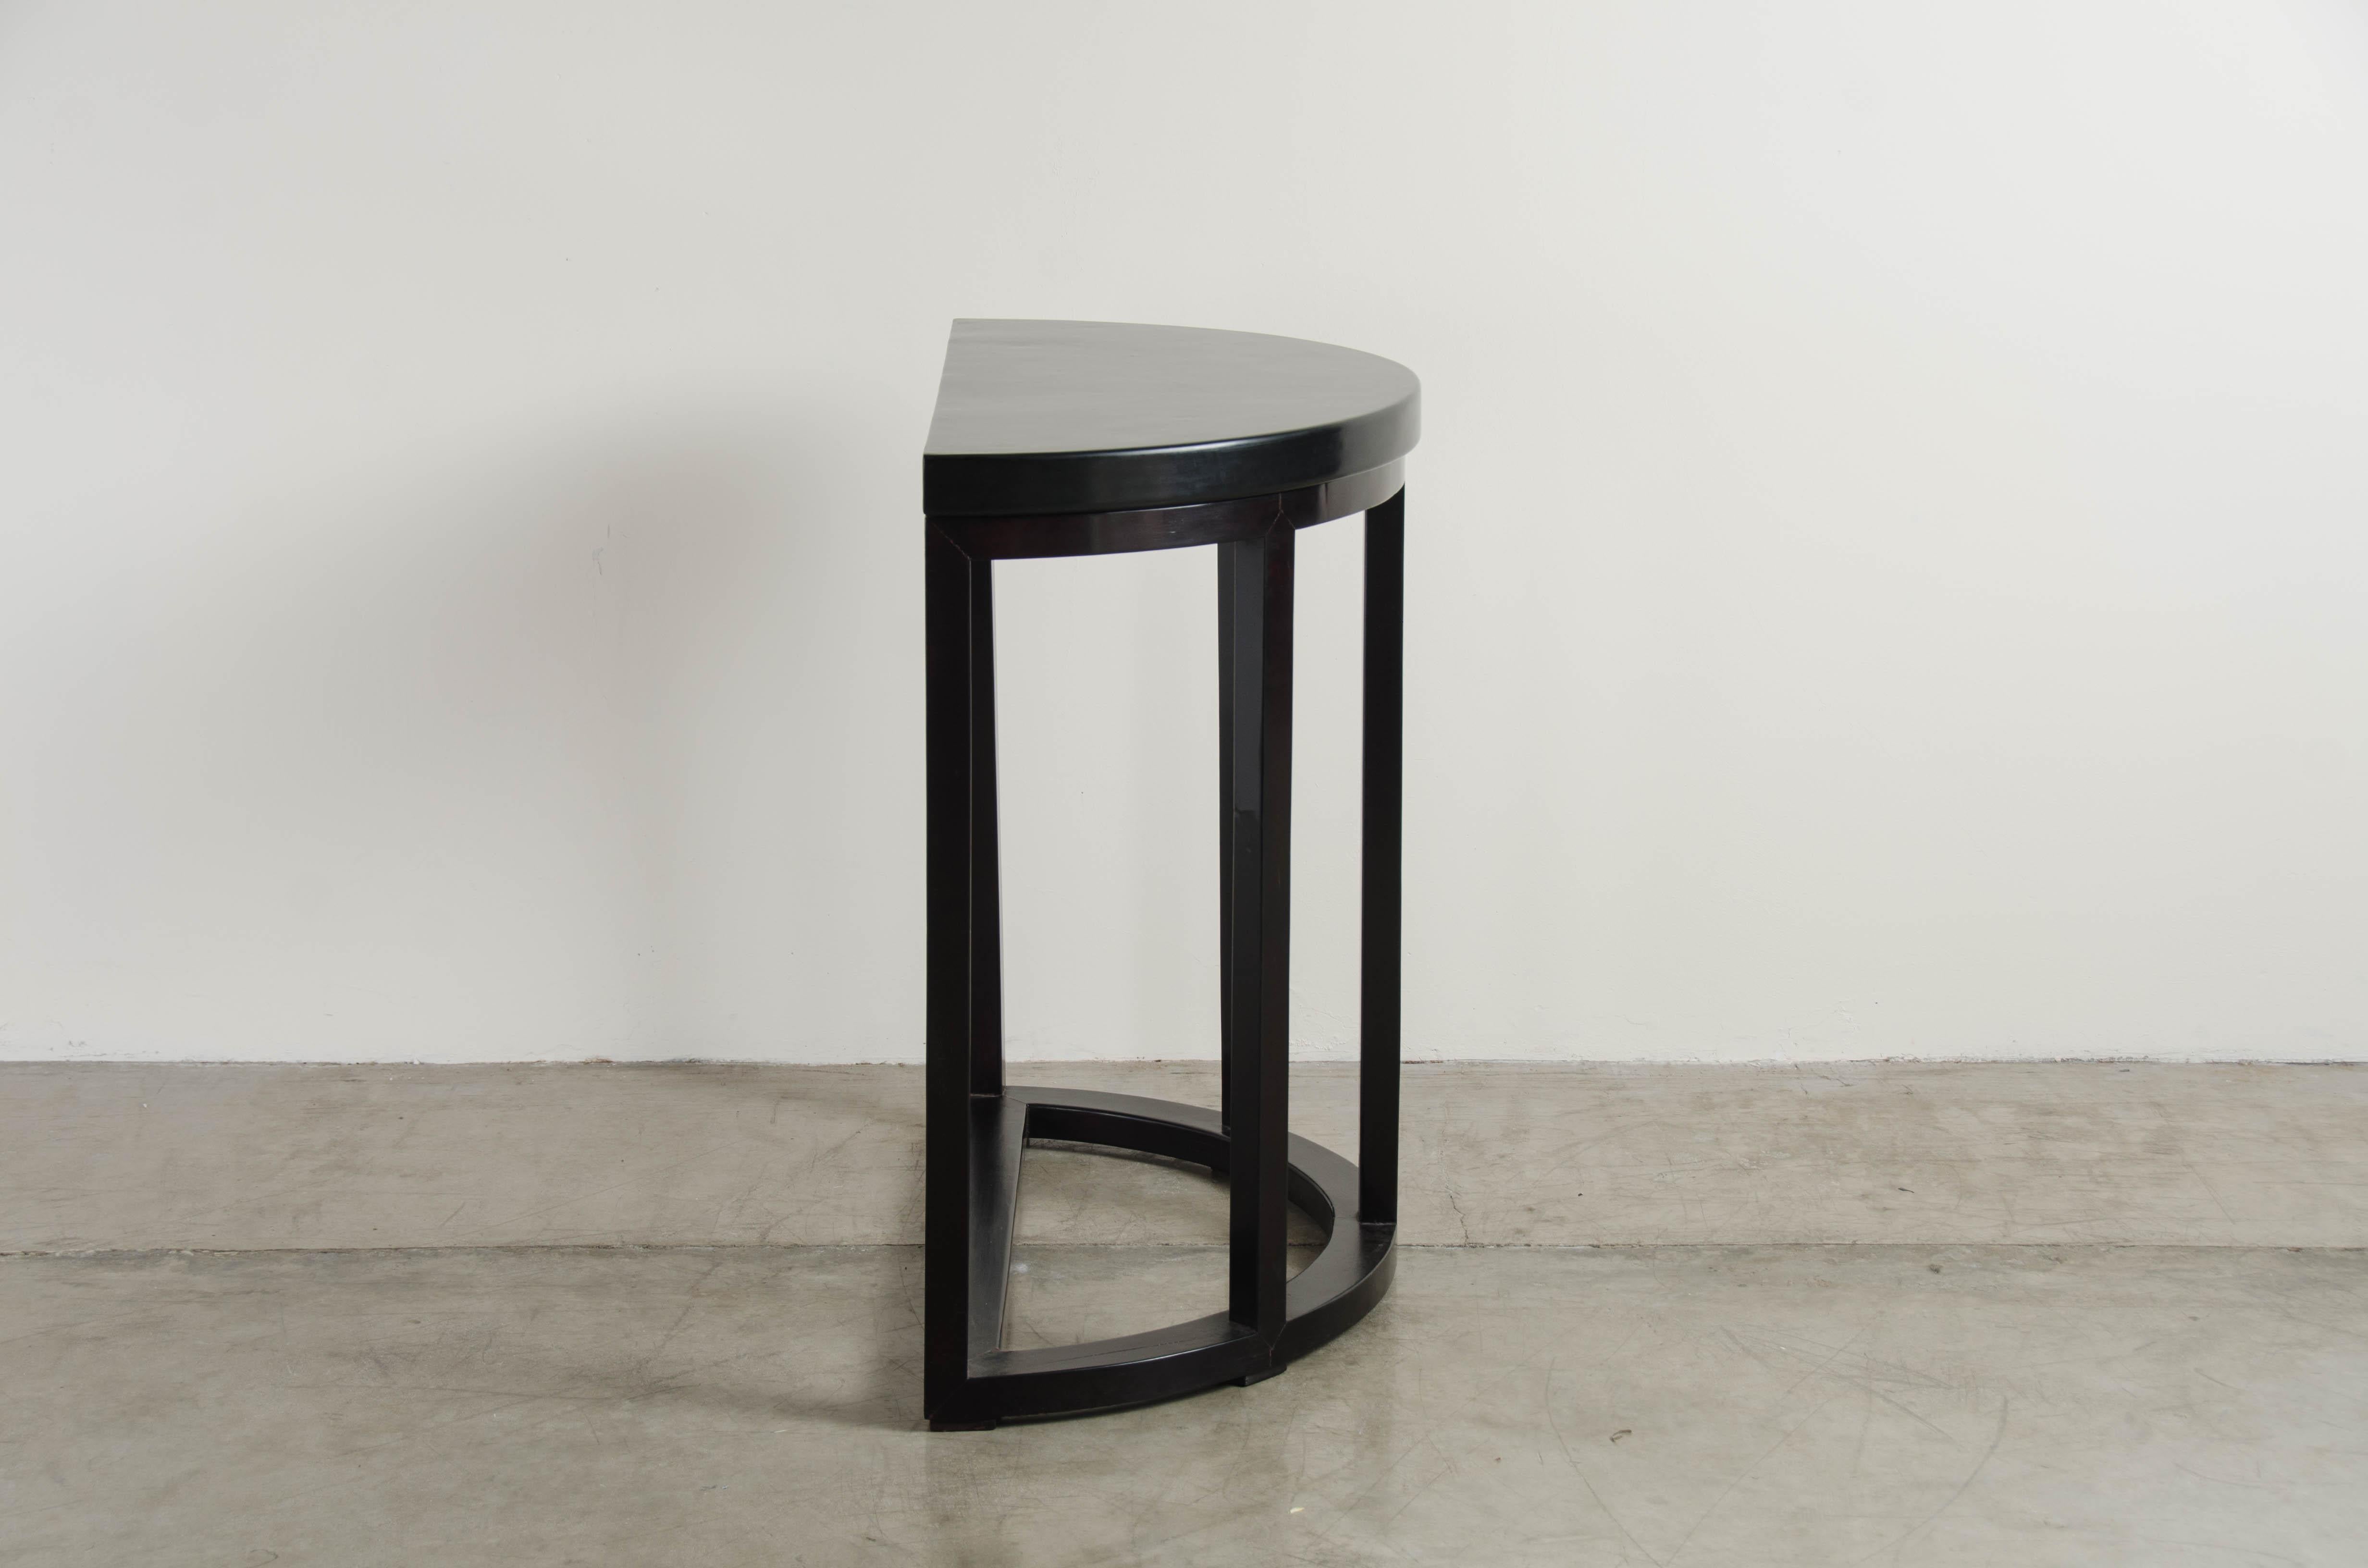 Half Round Table, Black Lacquer by Robert Kuo, Handmade, Limited Edition In New Condition For Sale In Los Angeles, CA